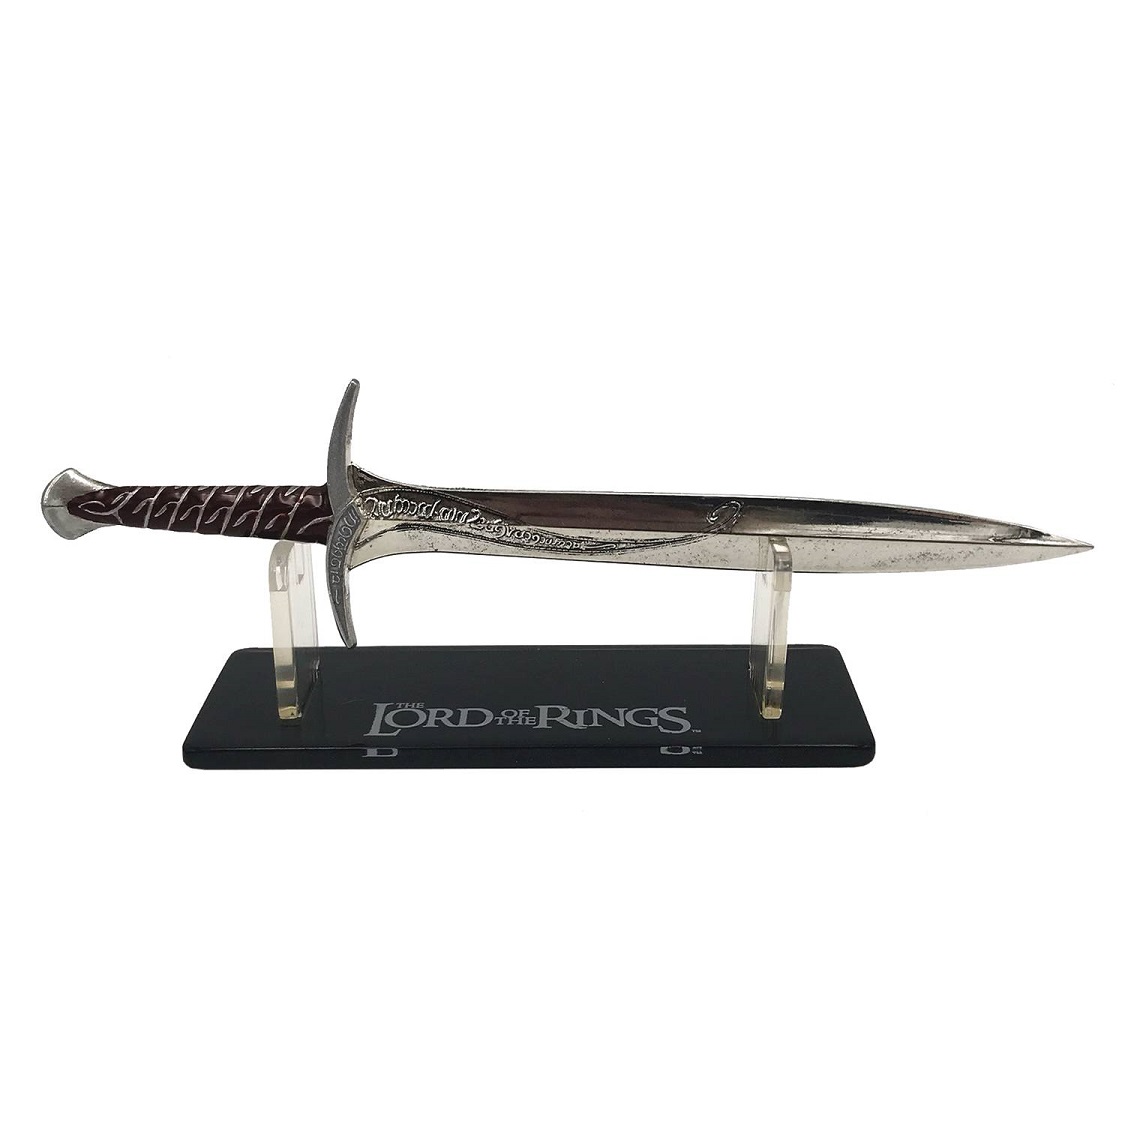 Lord of the Rings Sting Sword Scaled Prop Replica 